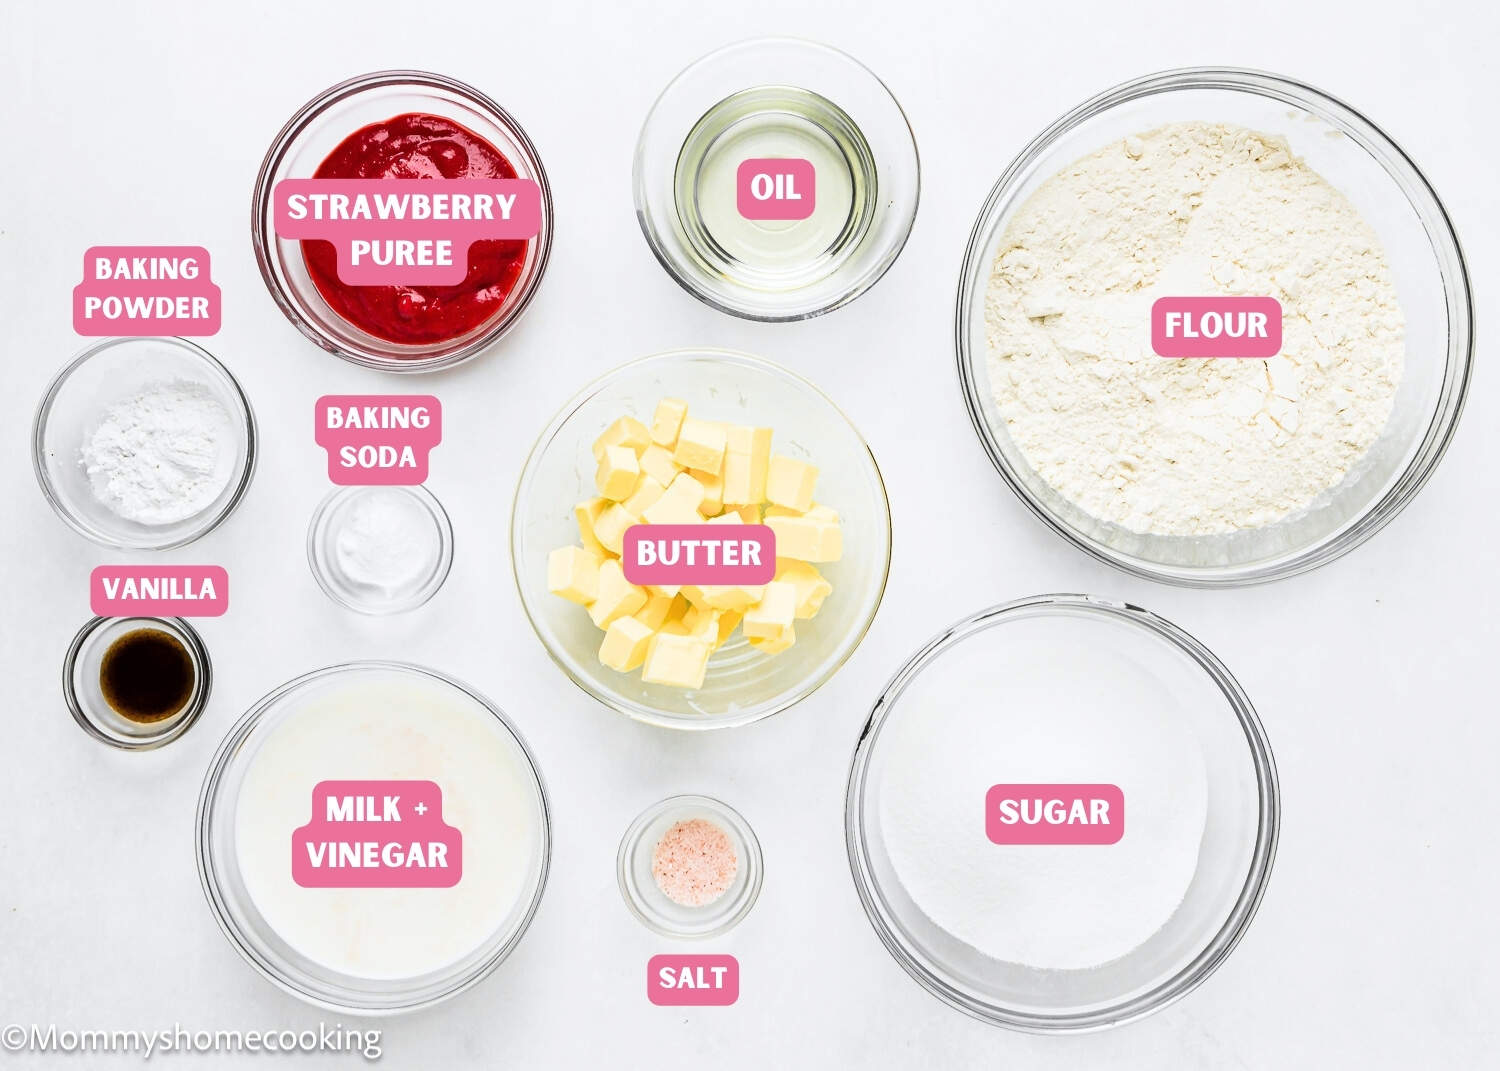 Ingredients needed to make Easy Fresh Strawberry Cake with name tags.